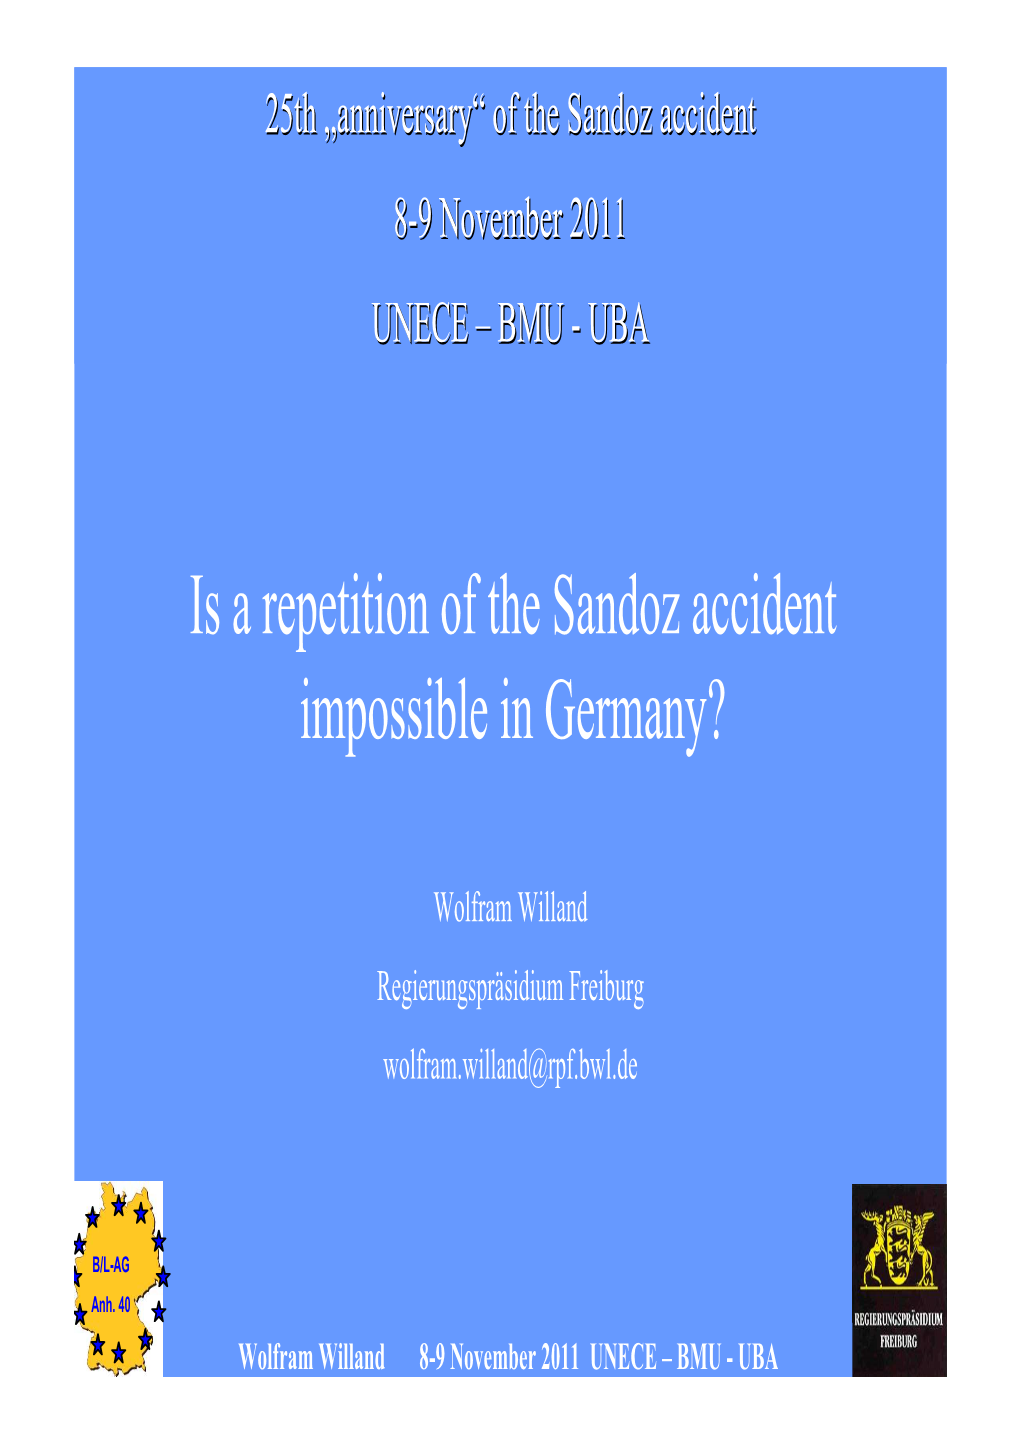 Is a Repetition of the Sandoz Accident Impossible in Germany?